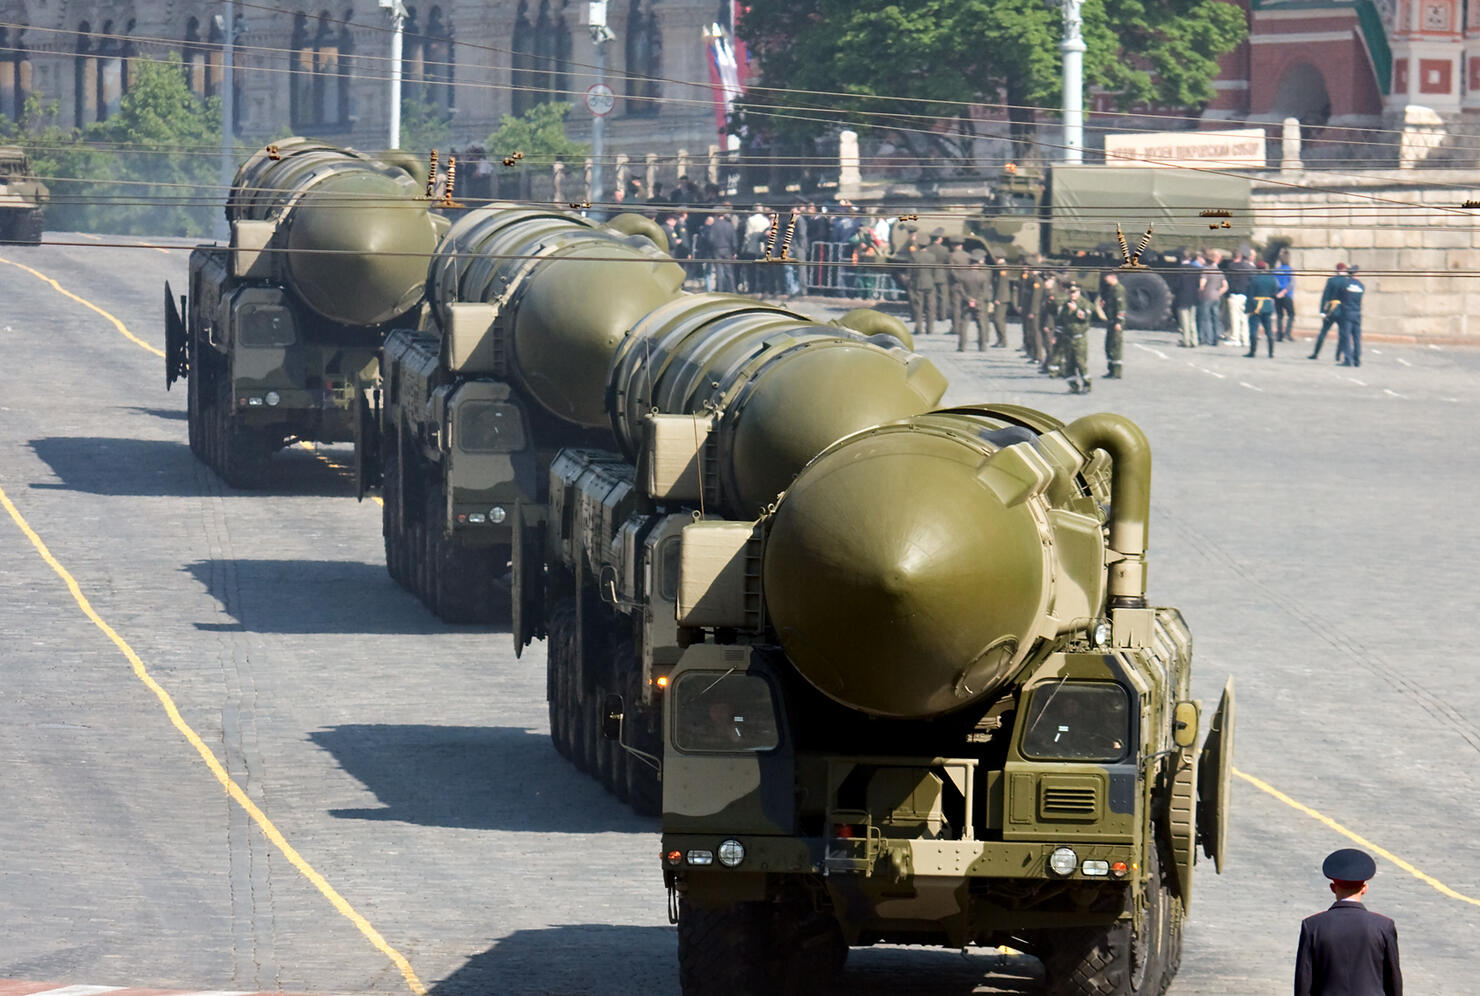 Russian nuclear missiles "Topol-M" in military parade, Moscow